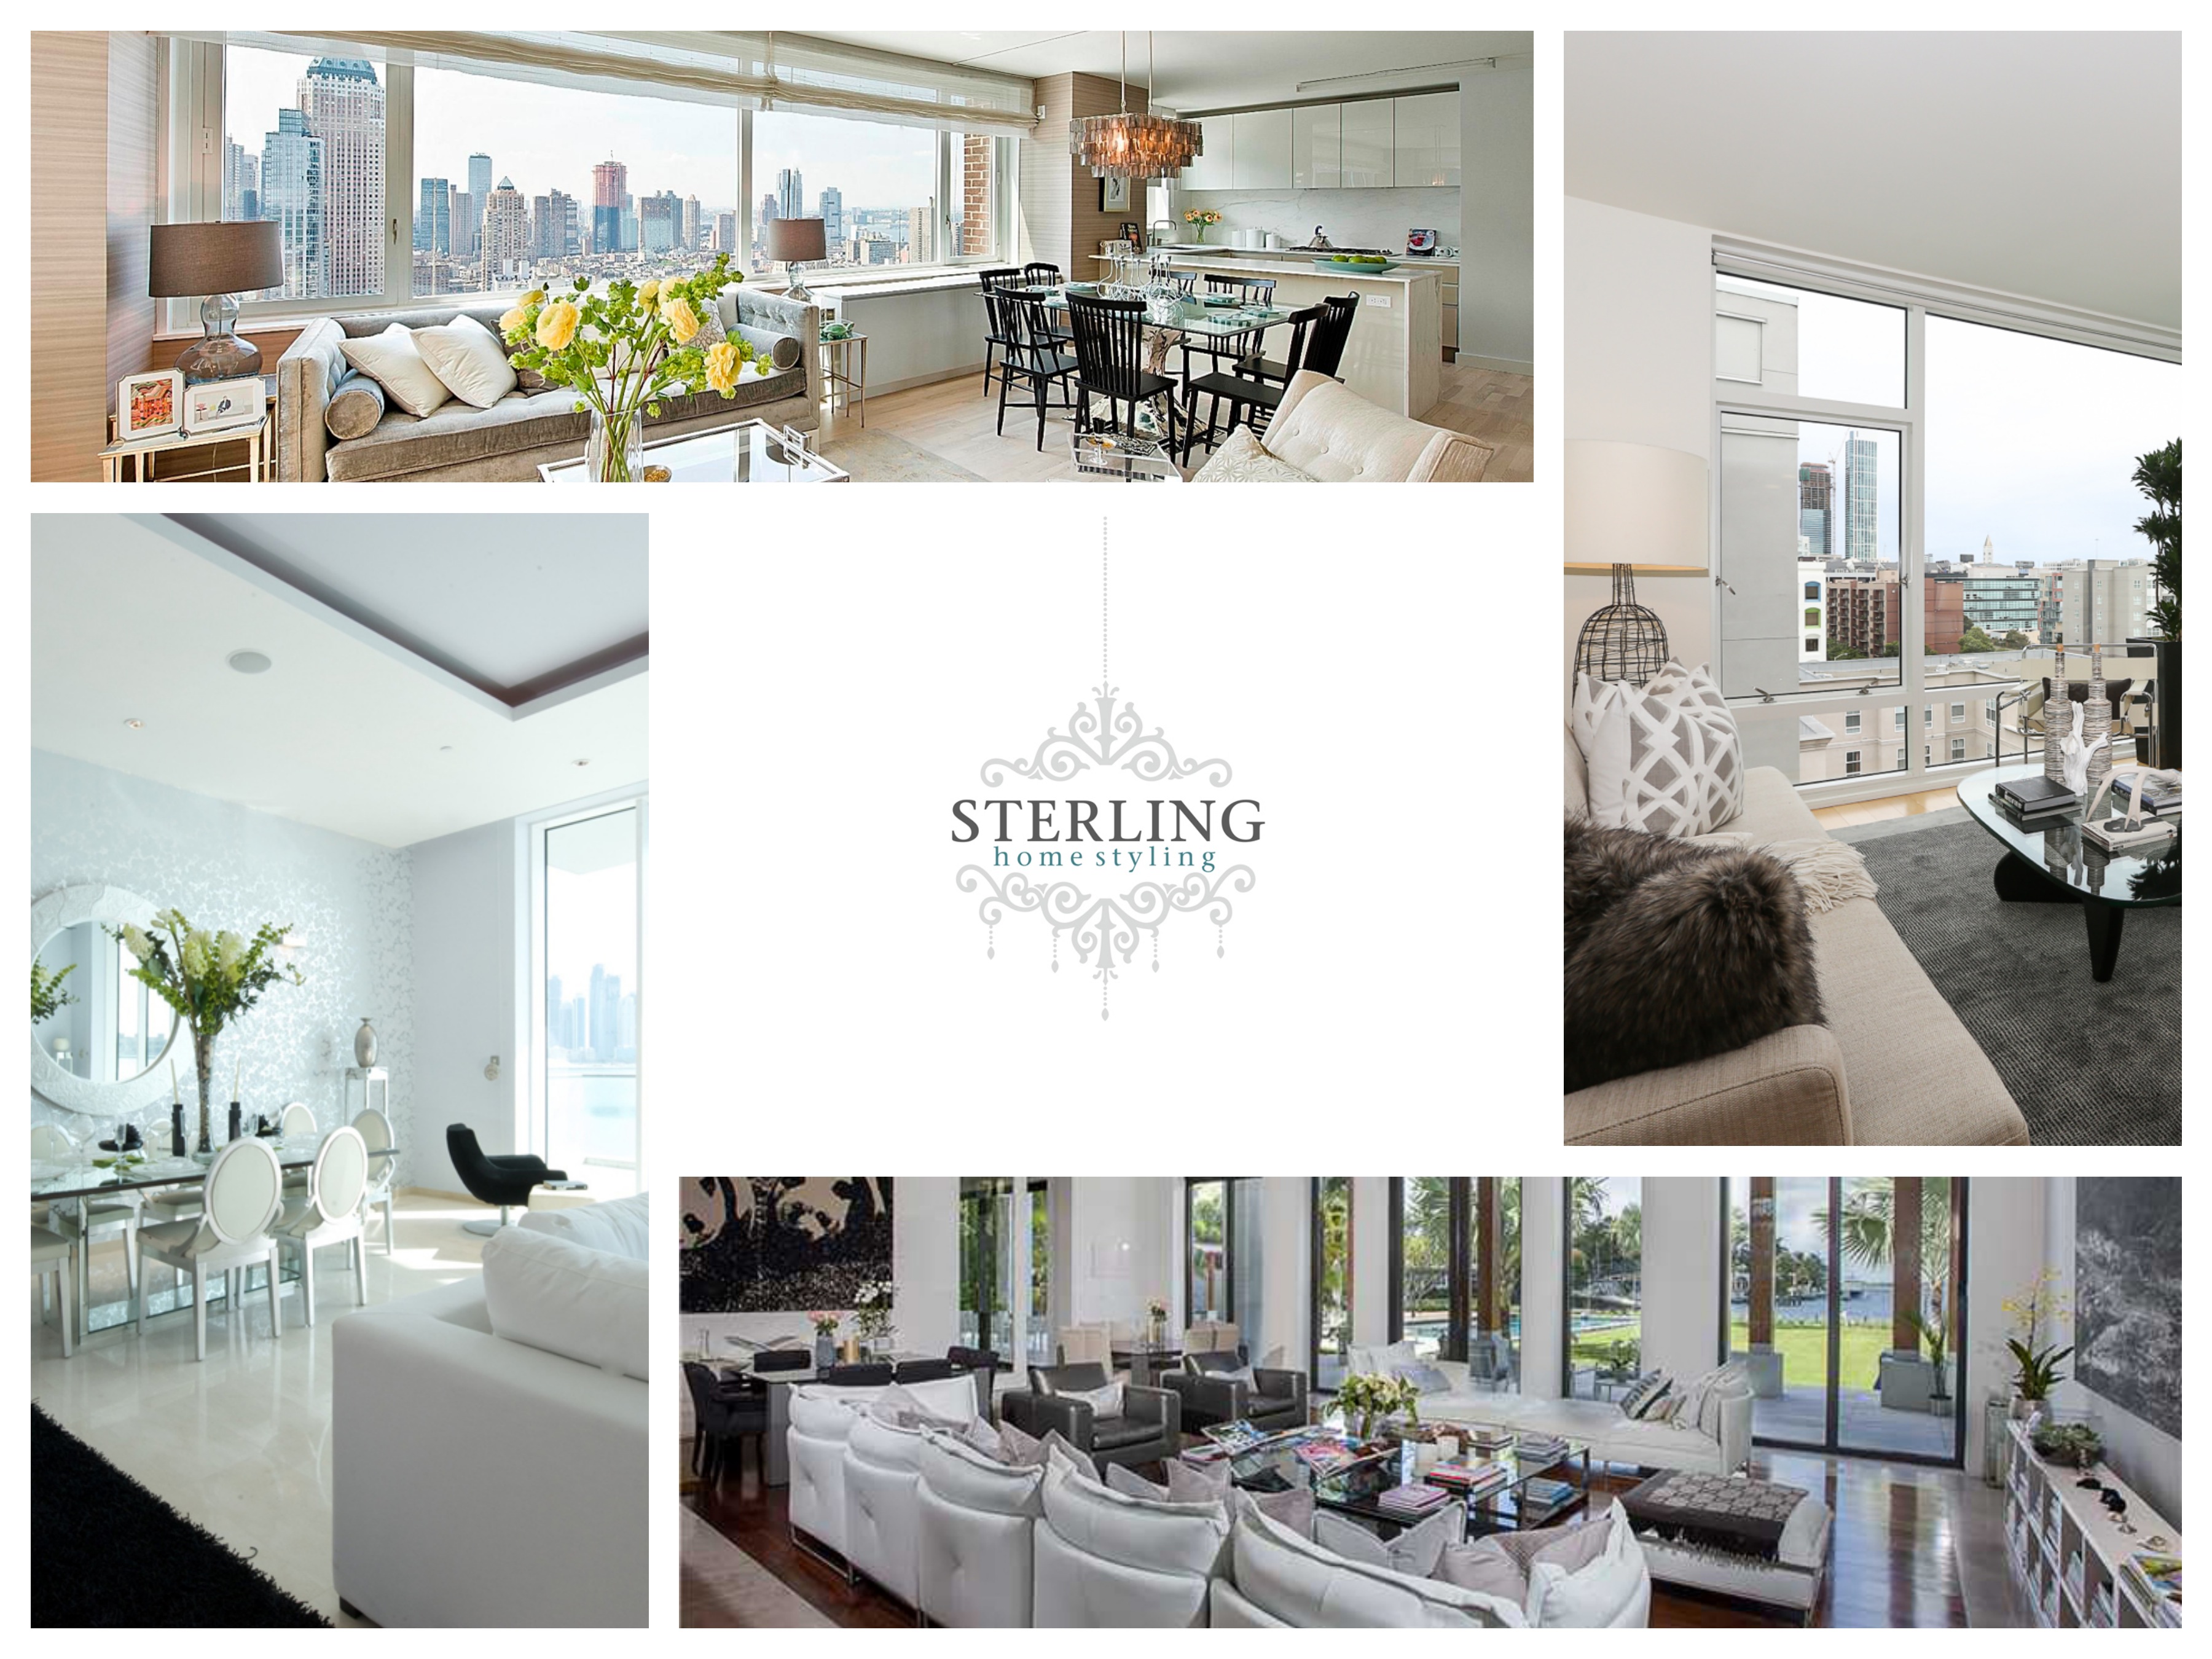 Sterling Home Styling Offers Real Estate Home Staging Courses to Realtors in Miami, New York, San Francisco and Dubai